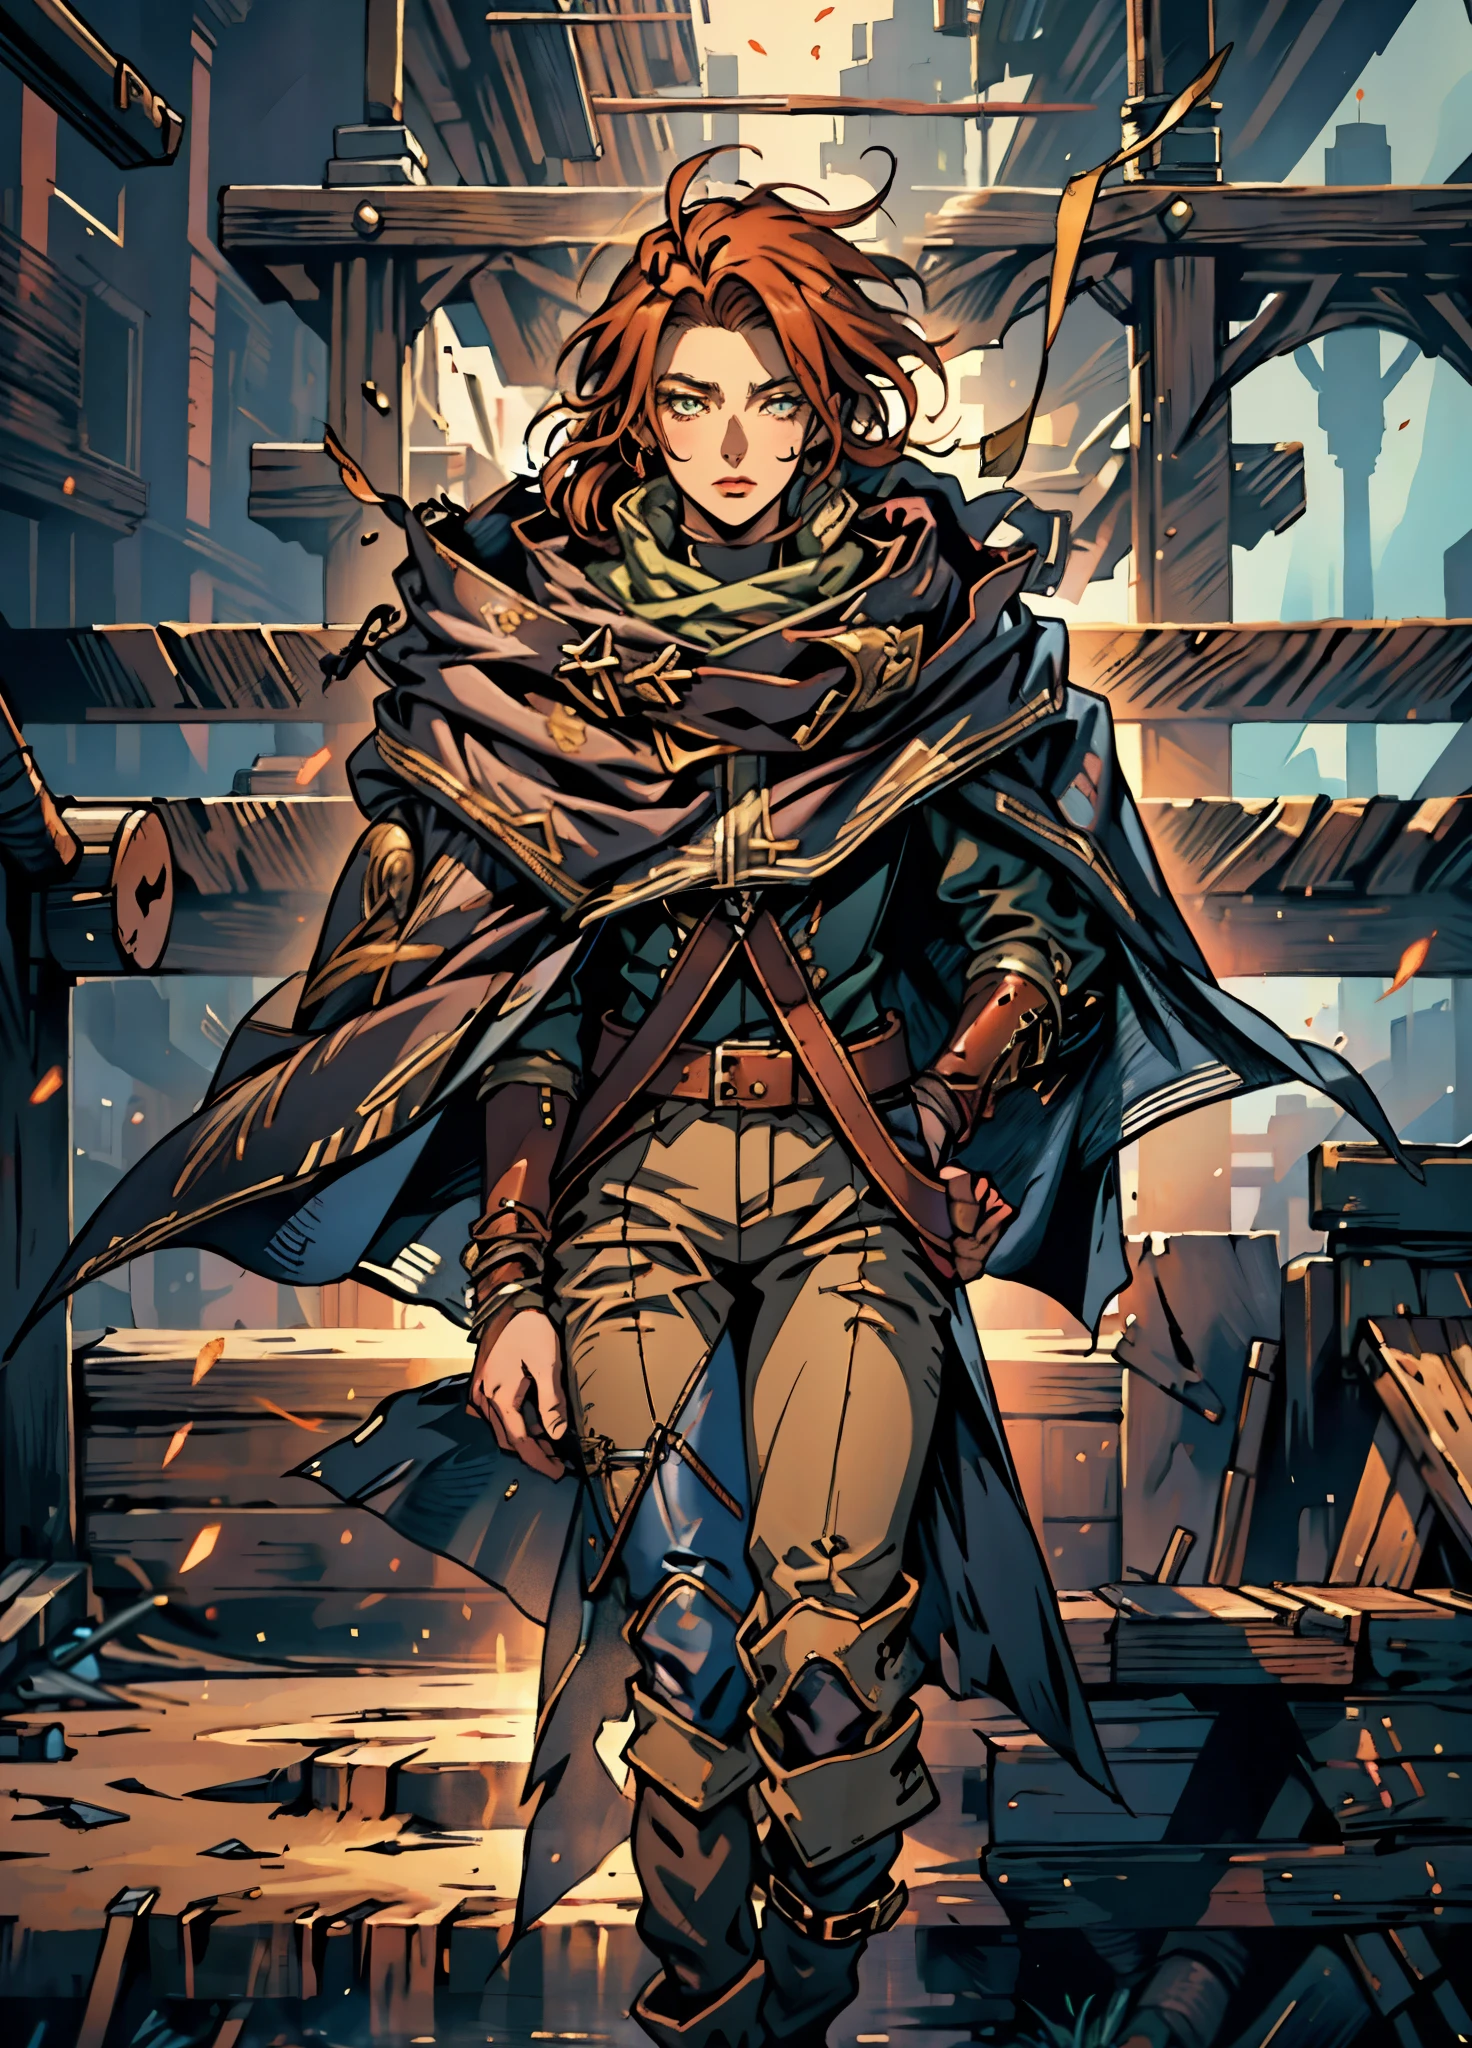 A woman with short reddish-brown hair, a determined gaze, her upper body is enveloped in a heavy cloak with leather accents, the cloak covers the lower half of her face, a tight-fitting long leather trench coat with ethnic-style details at the hem underneath, coarse fabric pants, sturdy knee-high leather boots, the background depicts a fantasy-style western town with swirling yellow sand, this character embodies a finely crafted fantasy western-style female shaman in anime style, exquisite and mature manga art style, high definition, best quality, highres, ultra-detailed, ultra-fine painting, extremely delicate, professional, anatomically correct, symmetrical face, extremely detailed eyes and face, high quality eyes, creativity, RAW photo, UHD, 8k, Natural light, cinematic lighting, masterpiece-anatomy-perfect, masterpiece:1.5